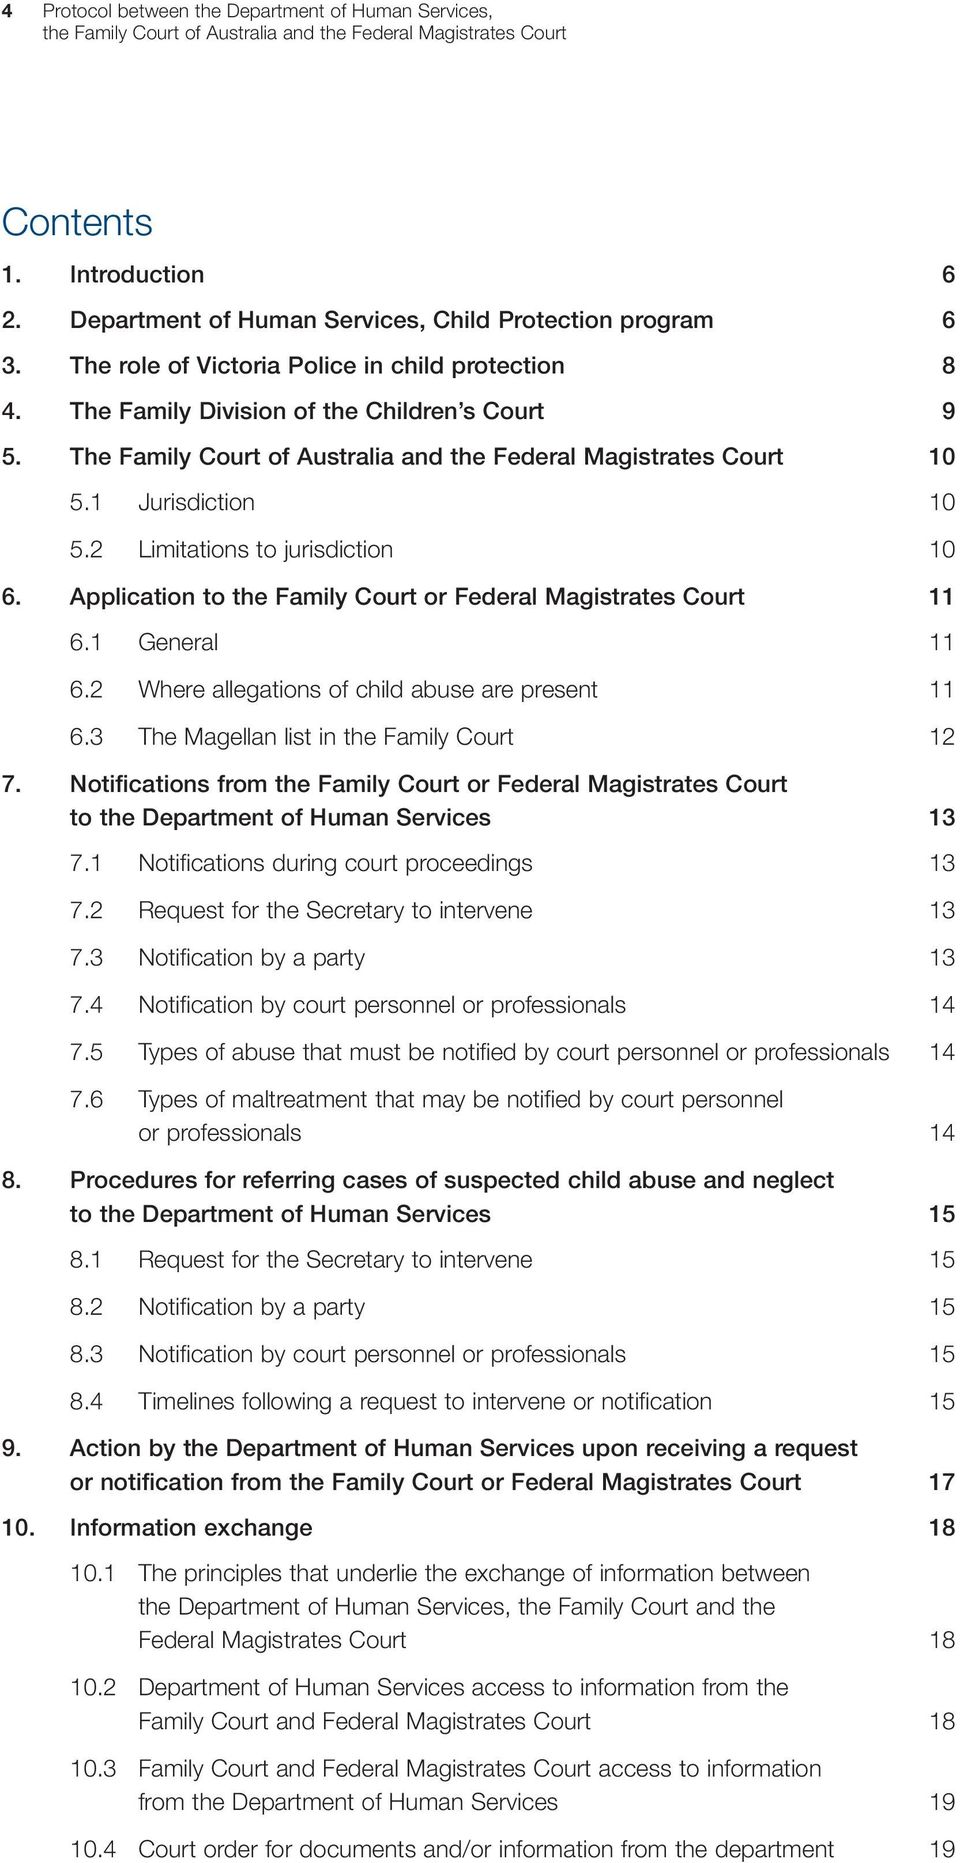 Application to the Family Court or Federal Magistrates Court 11 6.1 General 11 6.2 Where allegations of child abuse are present 11 6.3 The Magellan list in the Family Court 12 7.